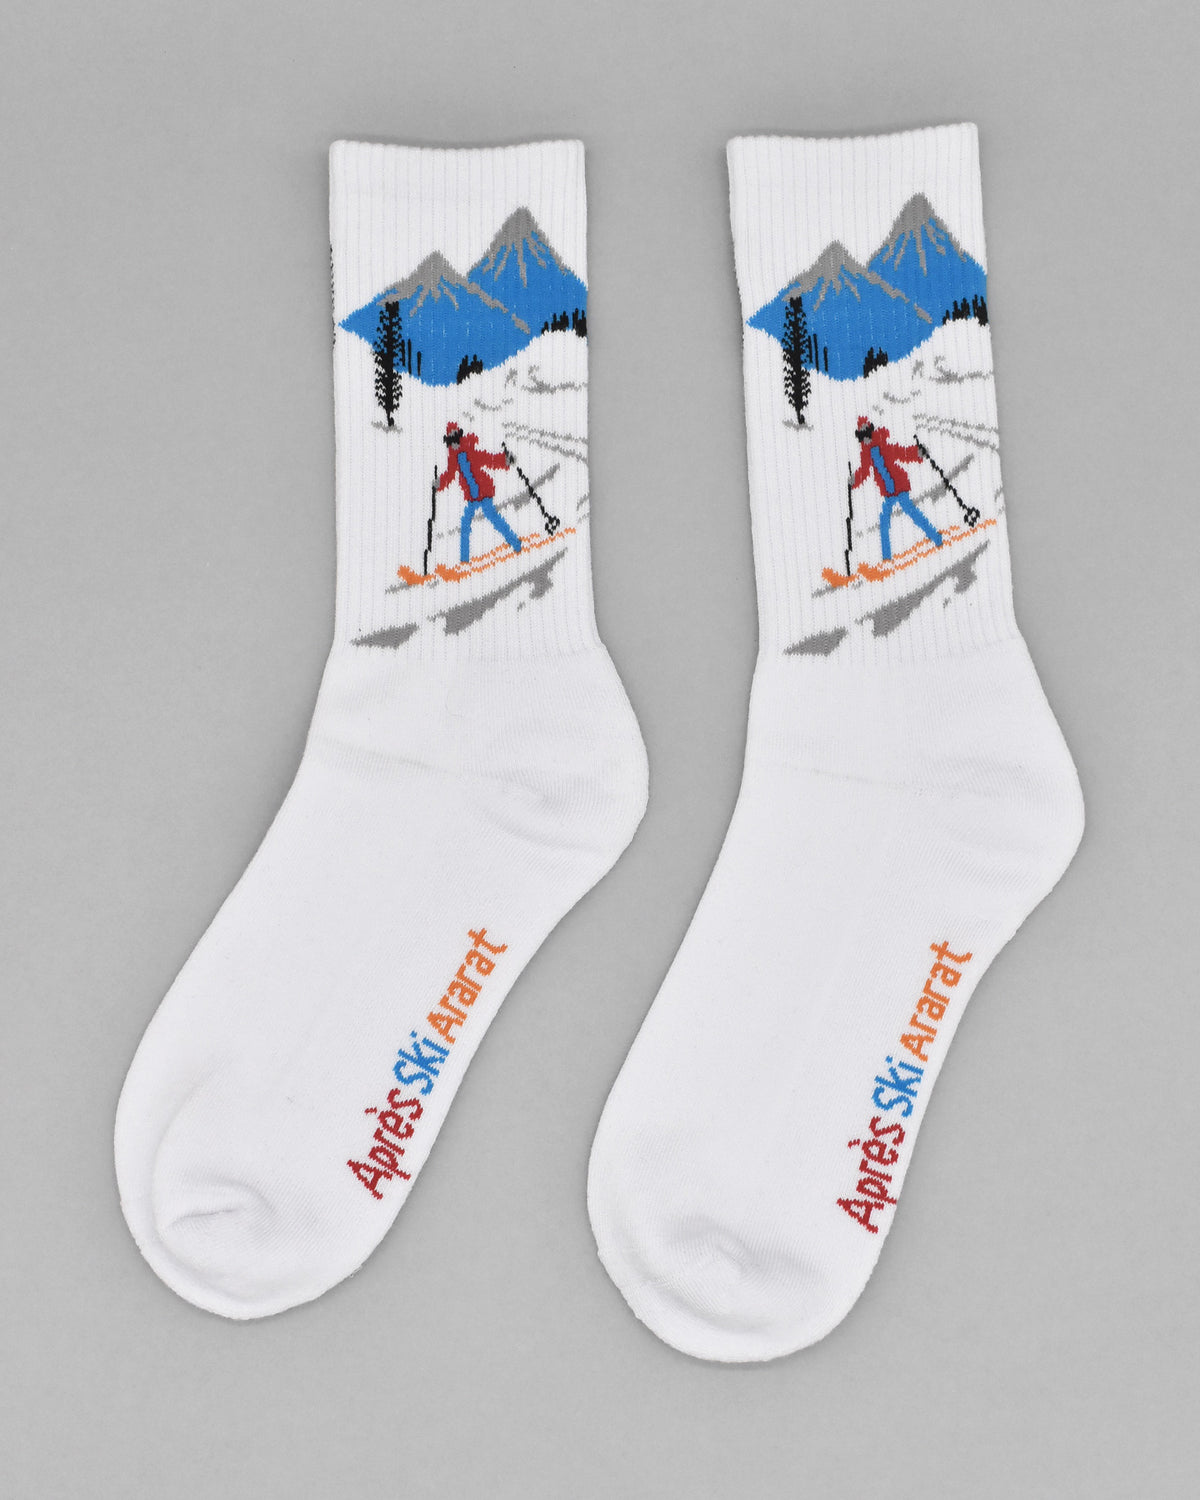 Après Ski Ararat - Ara the Rat's SOFTEST SOCK EVER. 100% Bamboo with a cushioned sole that you'll never want to take off.